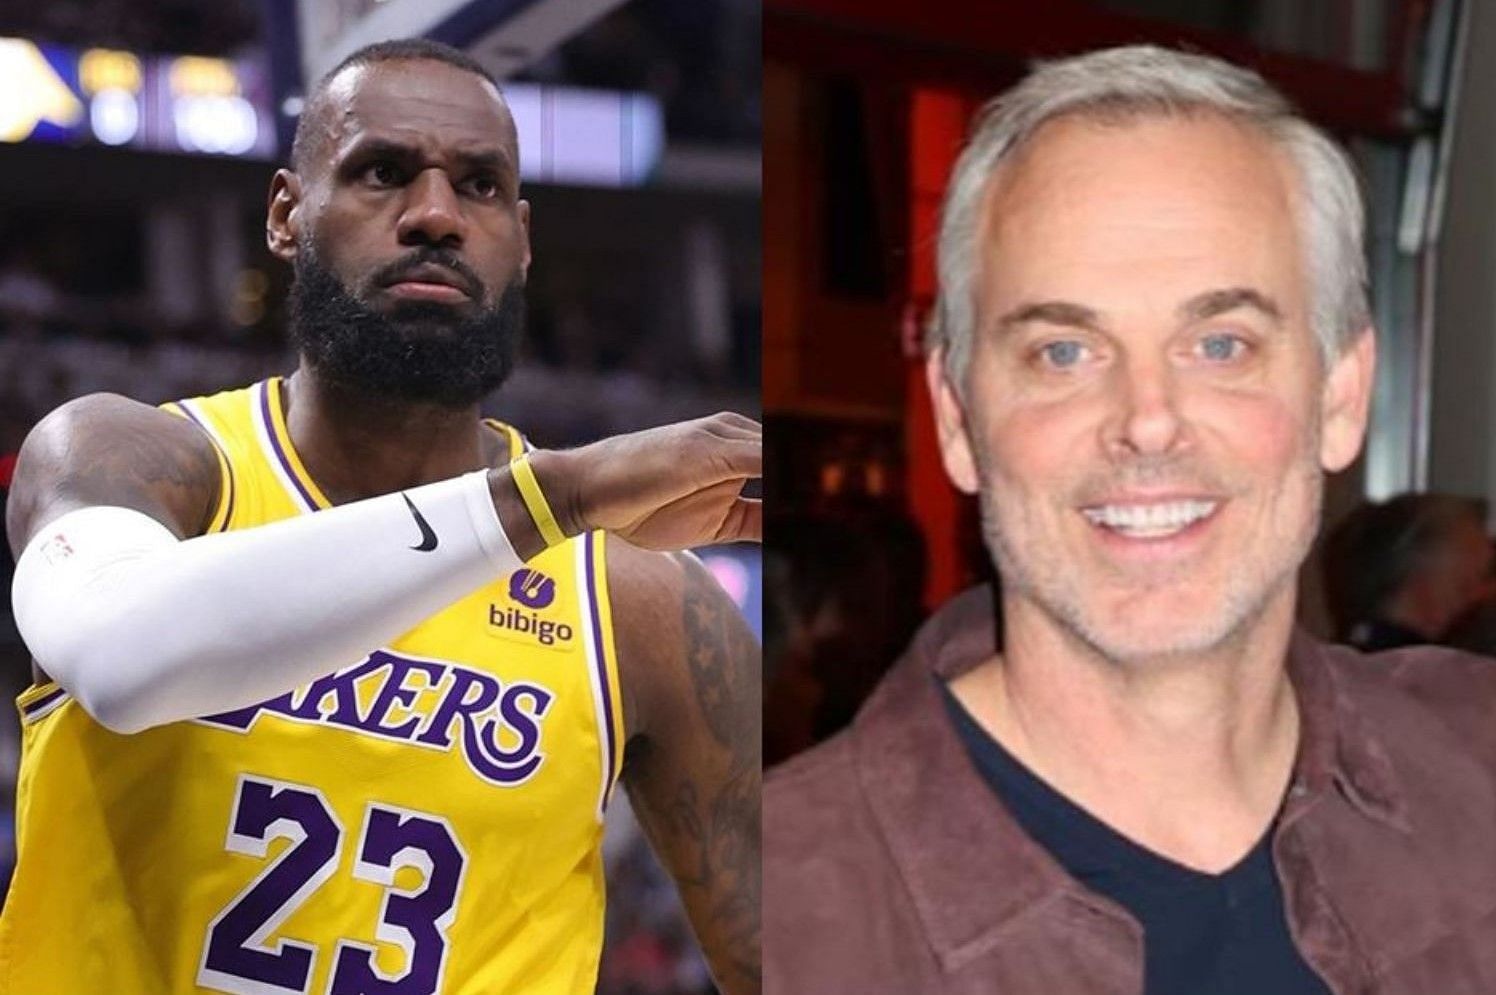 Colin Cowherd makes disheartening admission after being mocked by LeBron James.